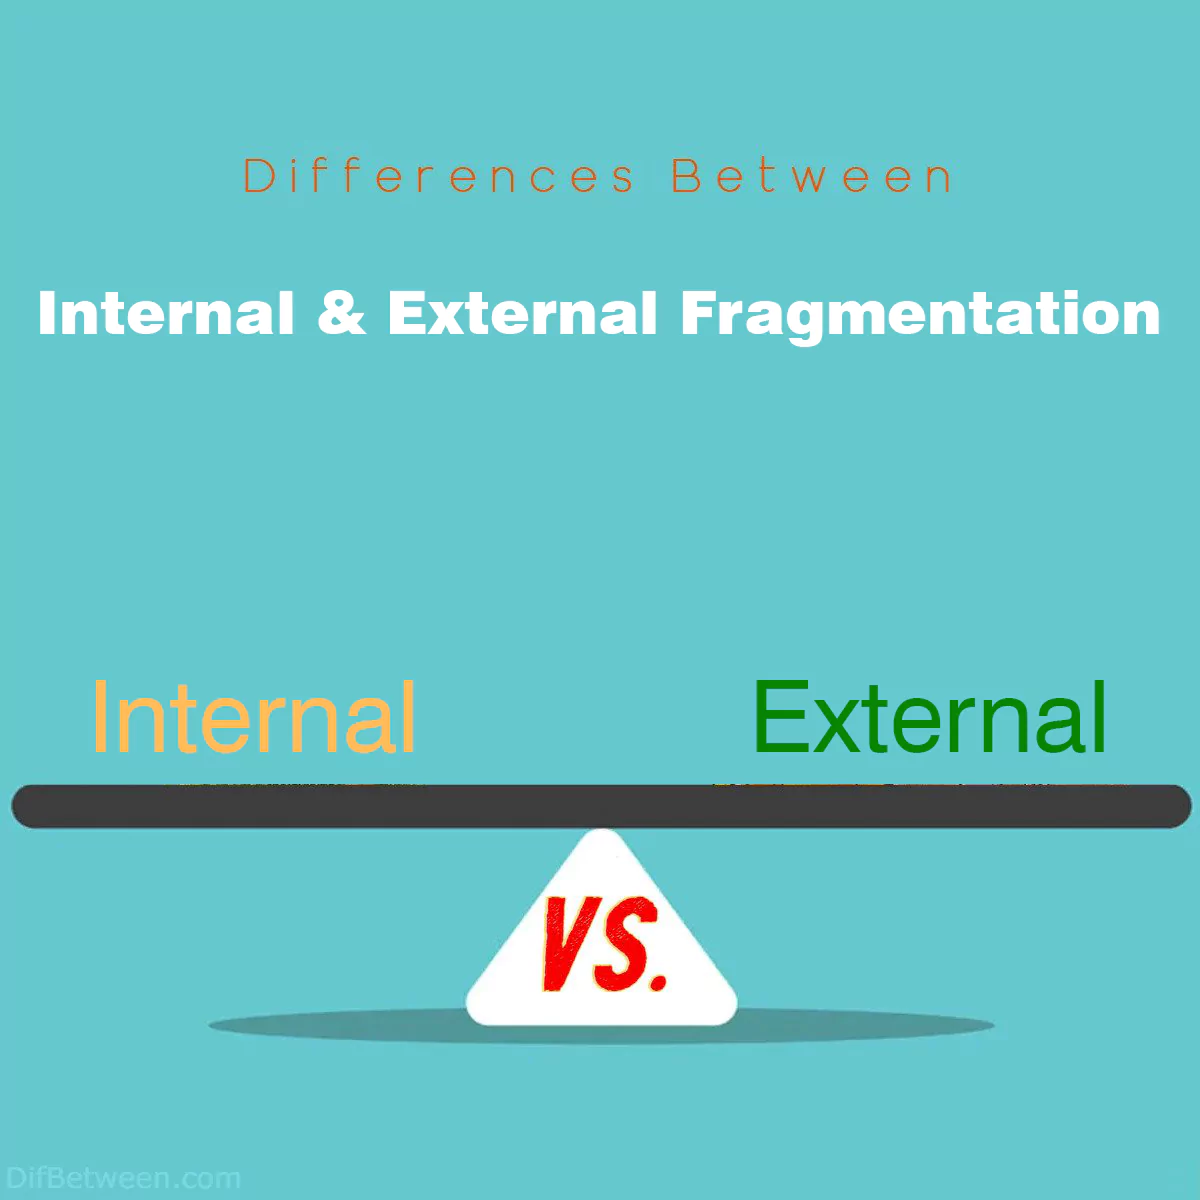 Differences Between Internal and External Fragmentation